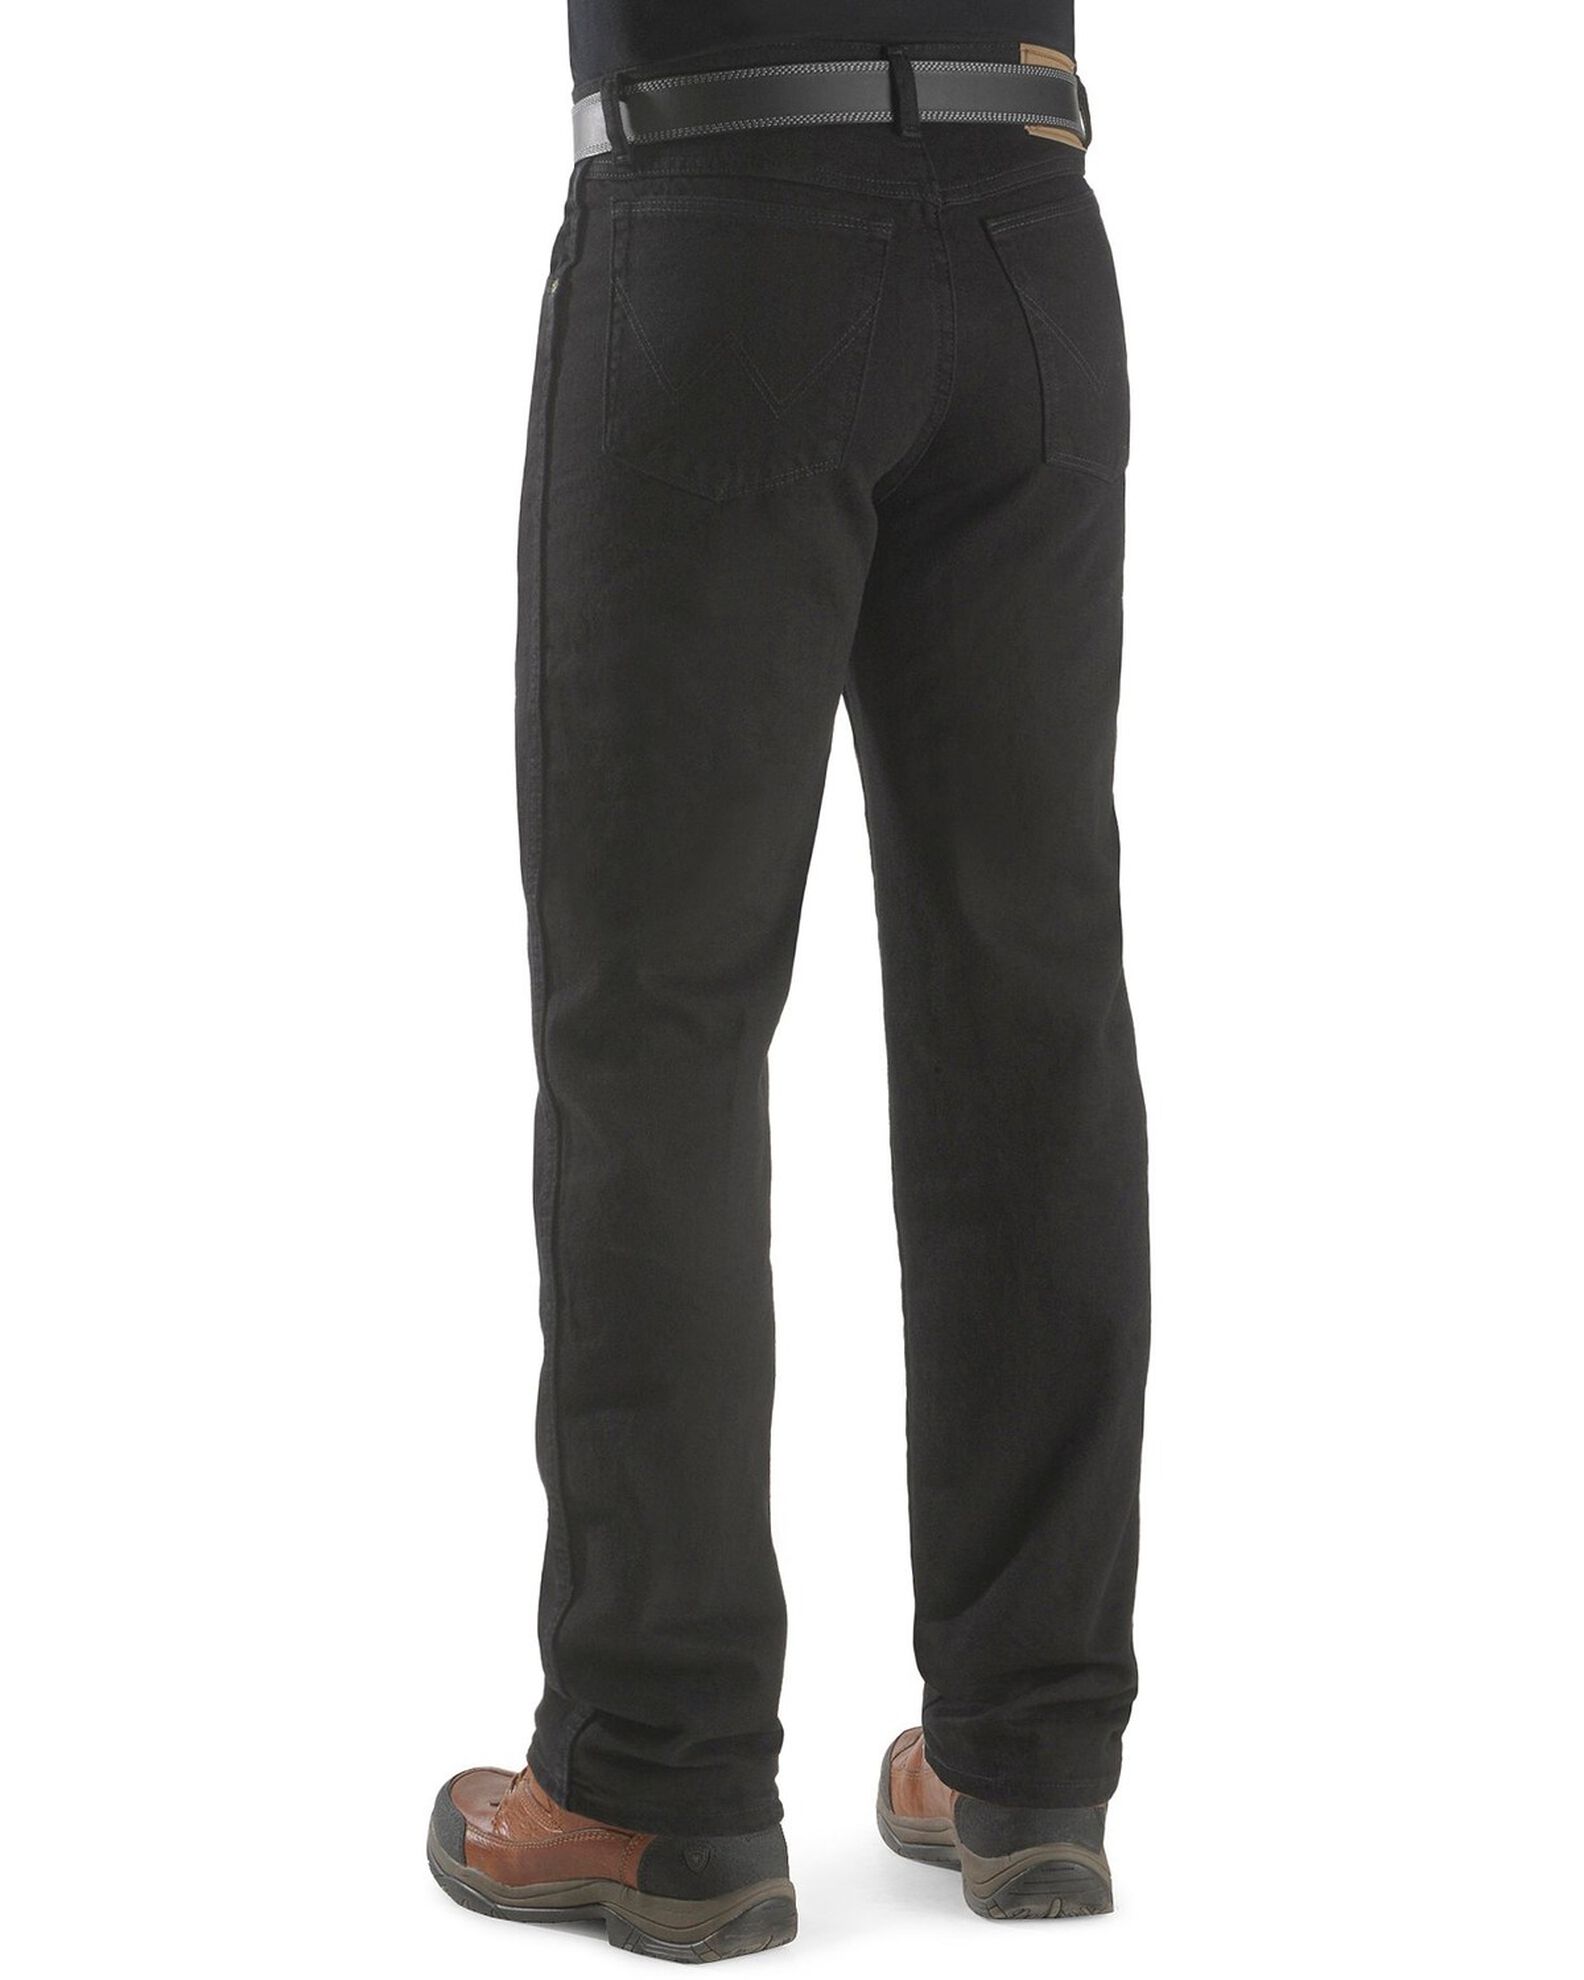 Product Name: Wrangler Rugged Wear Classic Fit Jeans